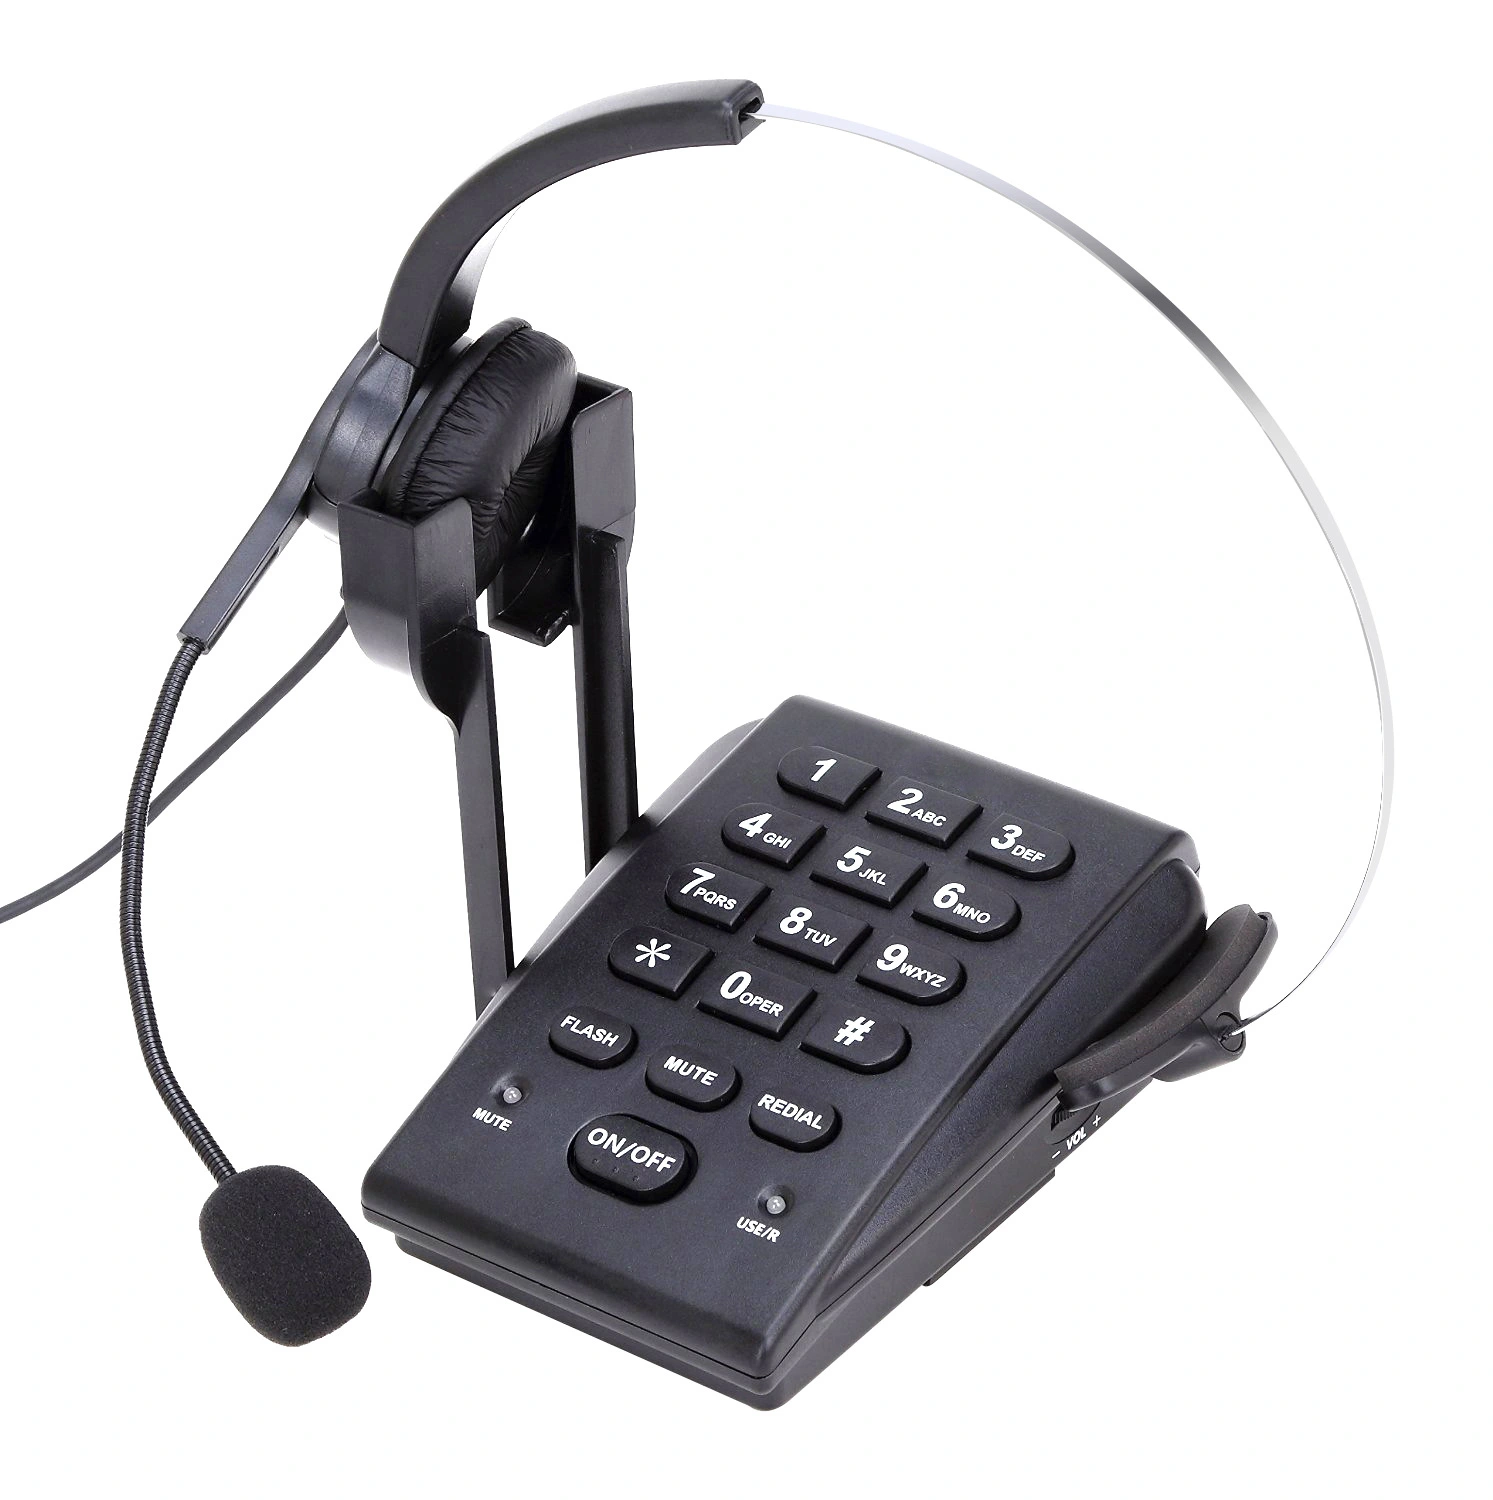 Shenzhen Cheeta Technology Co., Ltd. is a professional Headset Telephone manufacturer in China . Provide wholesale and OEM of Headset Telephone